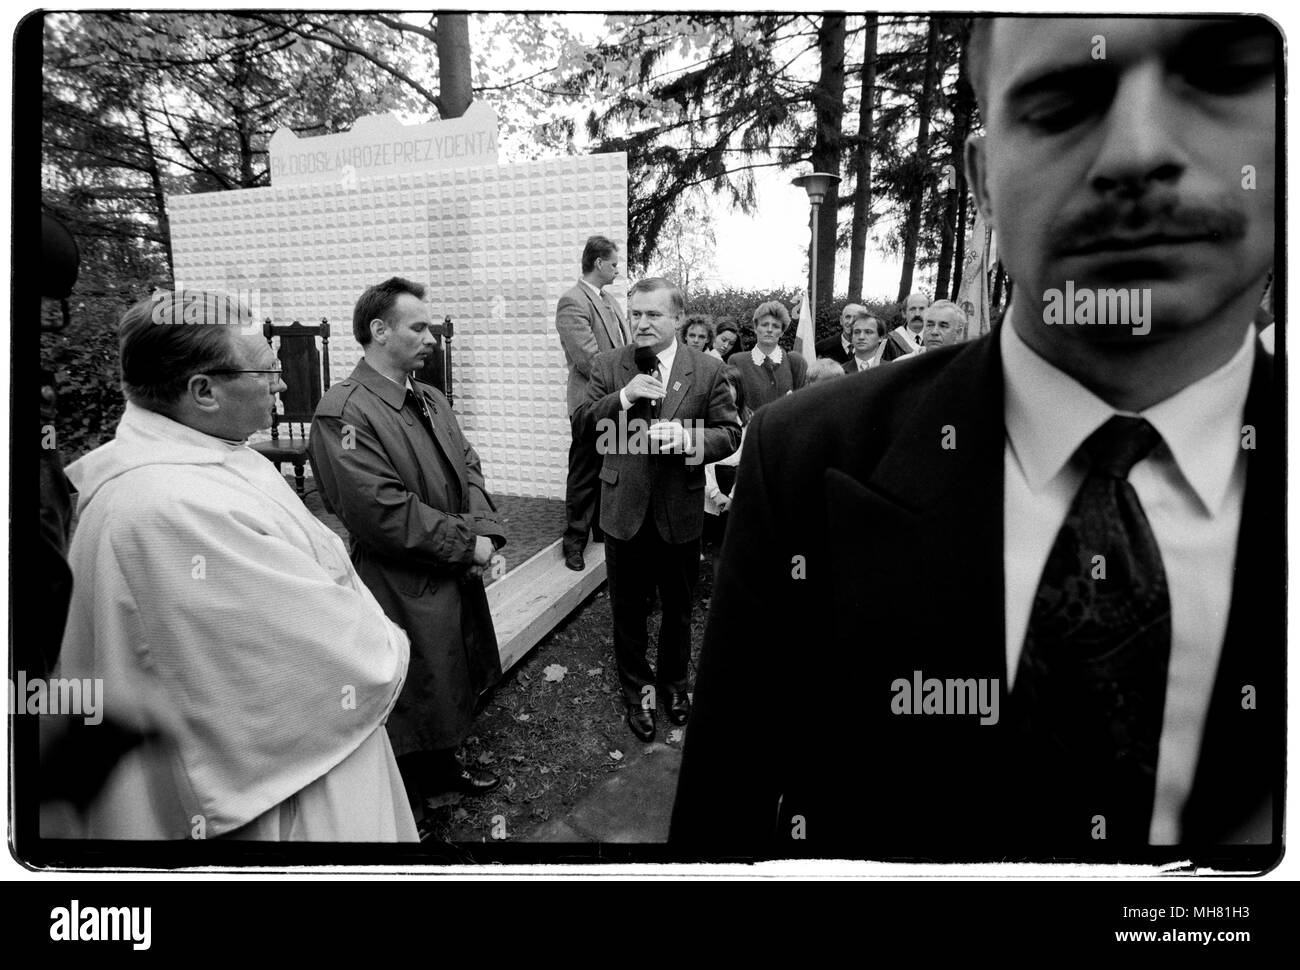 Lech Walesa on the Presidential campaign trail in Dziemiany, Poland. November 1995 Lech Wałęsa born 29 September 1943) is a retired Polish politician and labour activist. He co-founded and headed Solidarity (Solidarność), the Soviet bloc's first independent trade union, won the Nobel Peace Prize in 1983, and served as President of Poland from 1990 to 1995.[3]  While working at the Lenin Shipyard (now Gdańsk Shipyard), Wałęsa, an electrician, became a trade-union activist, for which he was persecuted by the Communist authorities, Stock Photo